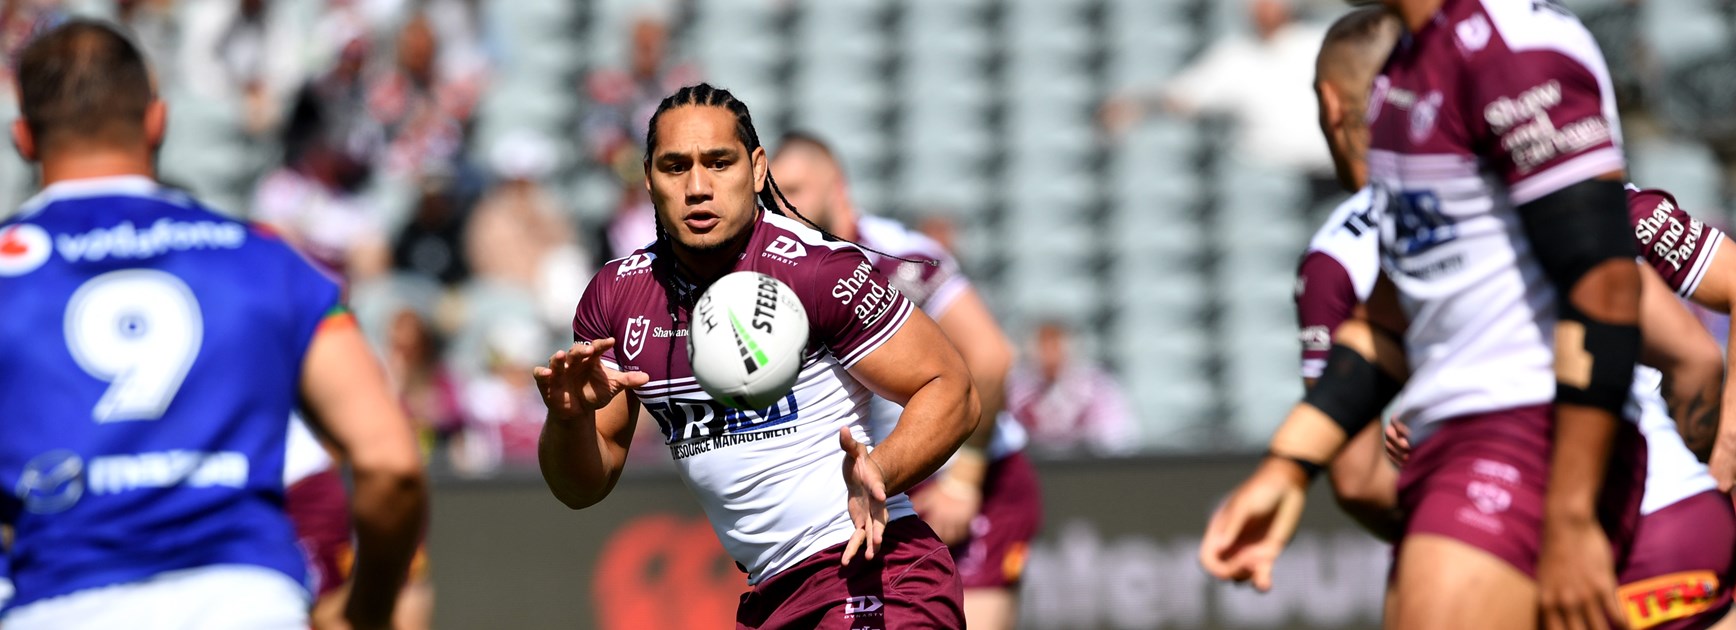 Sea Eagles go down to Warriors in final game